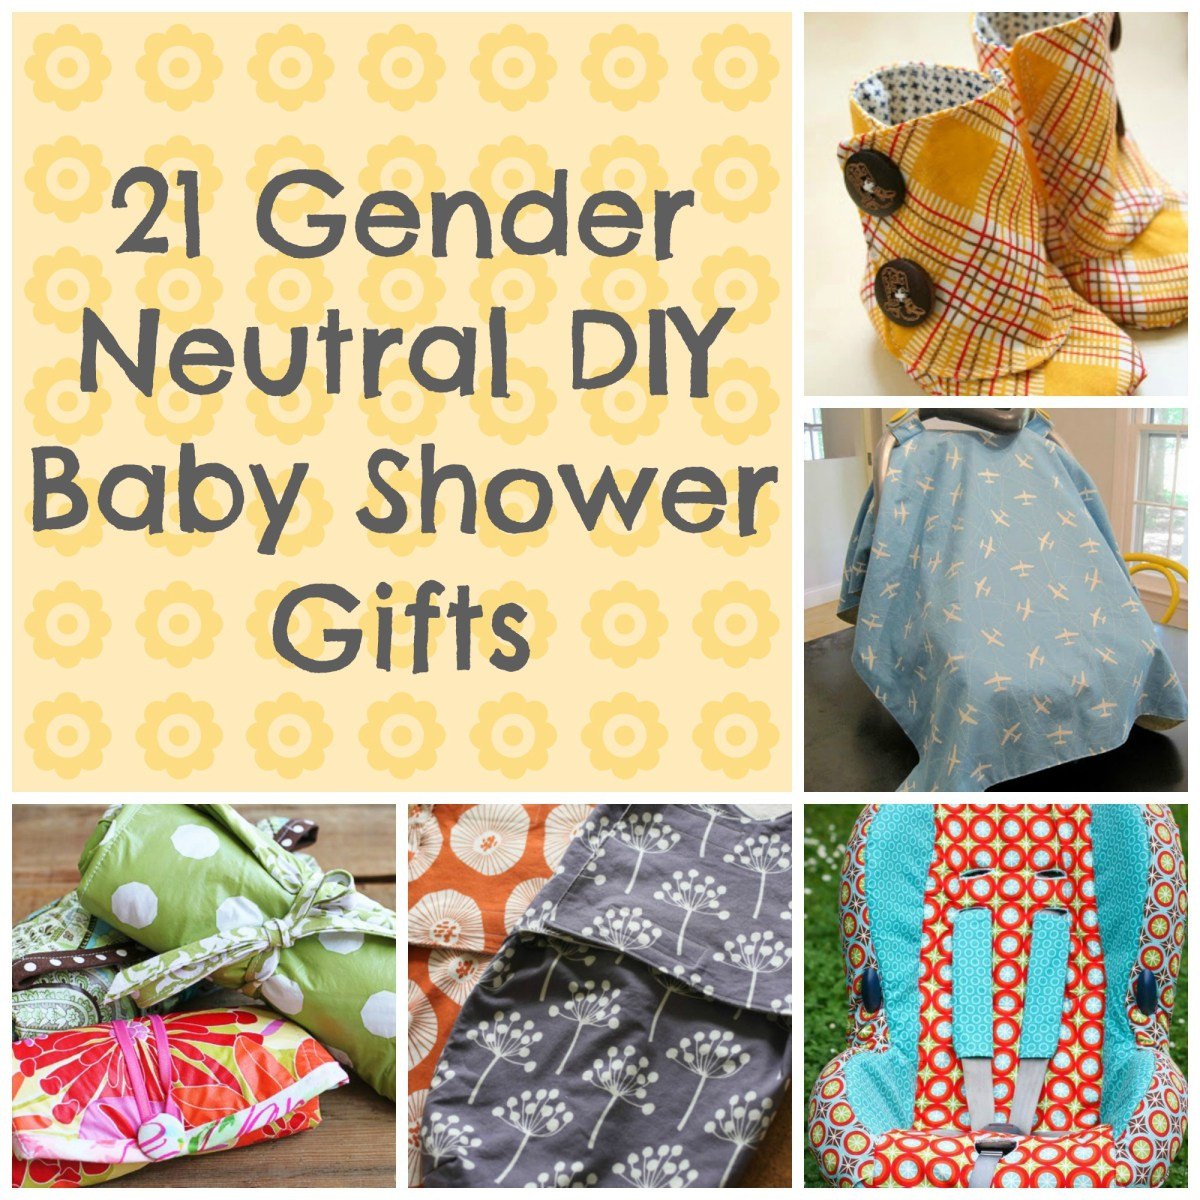 Gender Neutral Baby Shower Gift Ideas
 21 Awesome DIY Baby Shower Gift Ideas That Are Gender Neutral